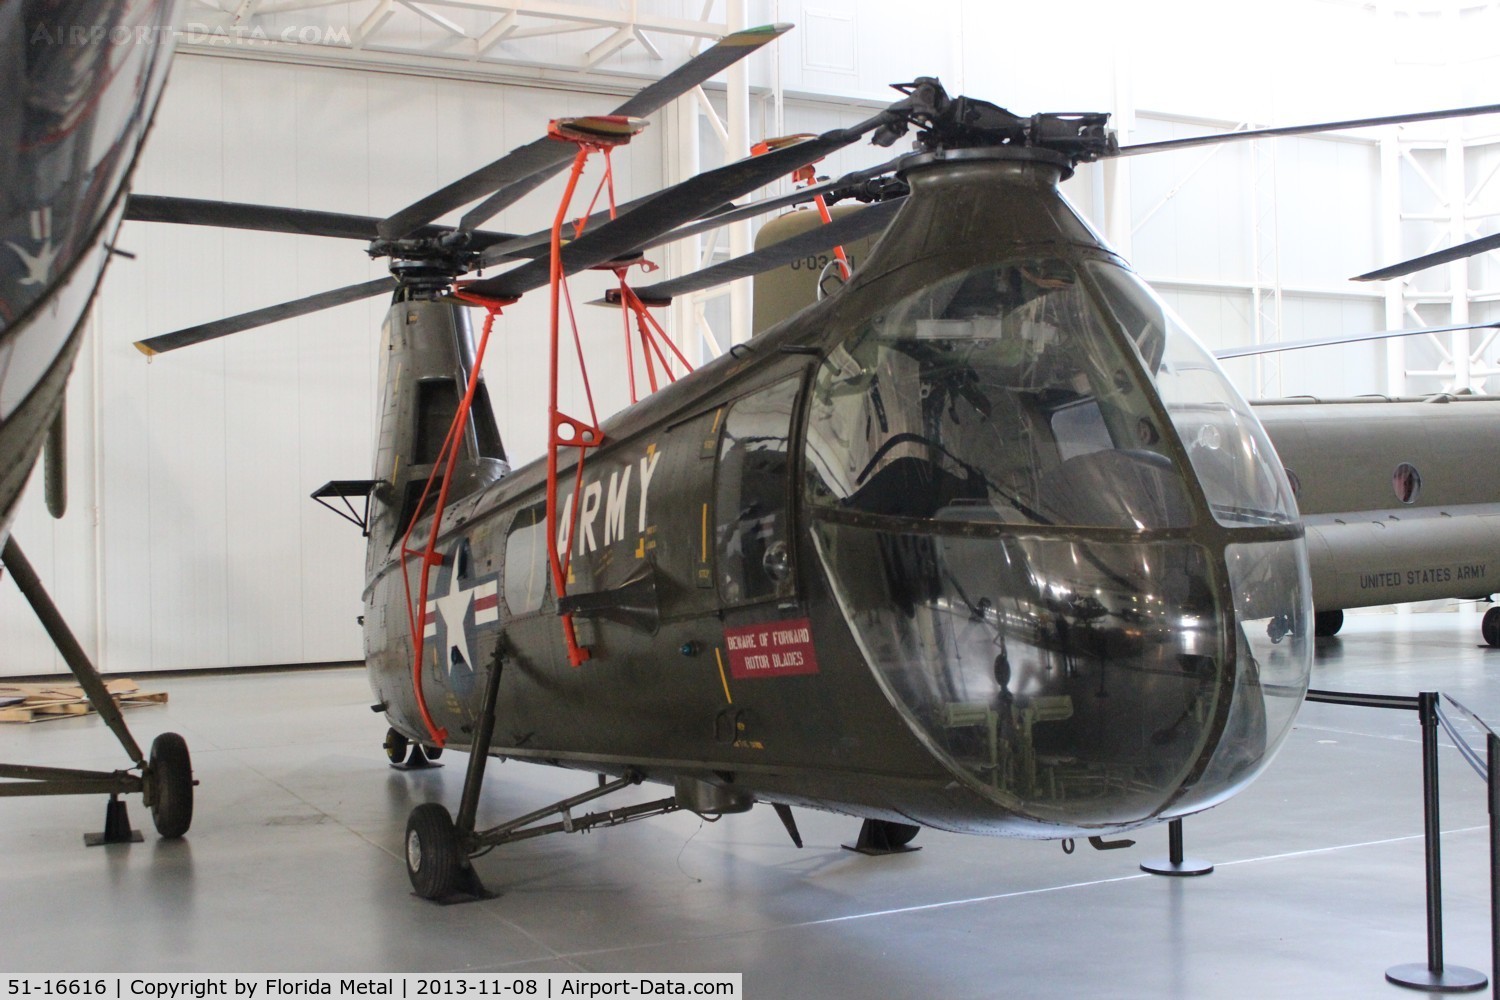 51-16616, 1953 Piasecki H-25A Army Mule C/N 25, H-25A Army Mule at Army Aviation Museum